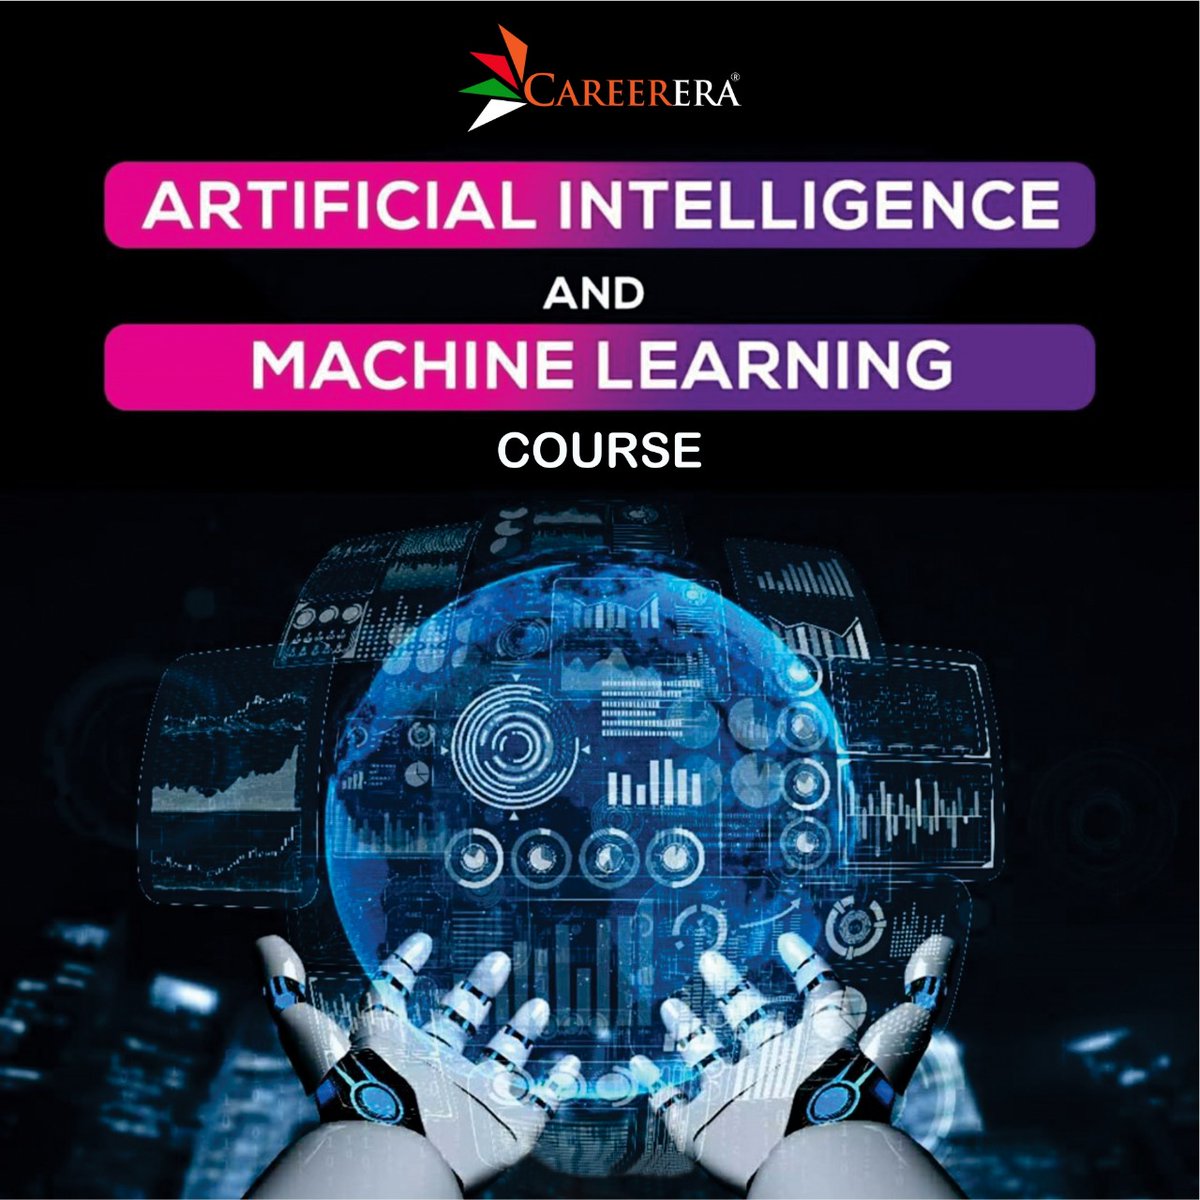 Careerera launches,new course,artificial intelligence,machine learning